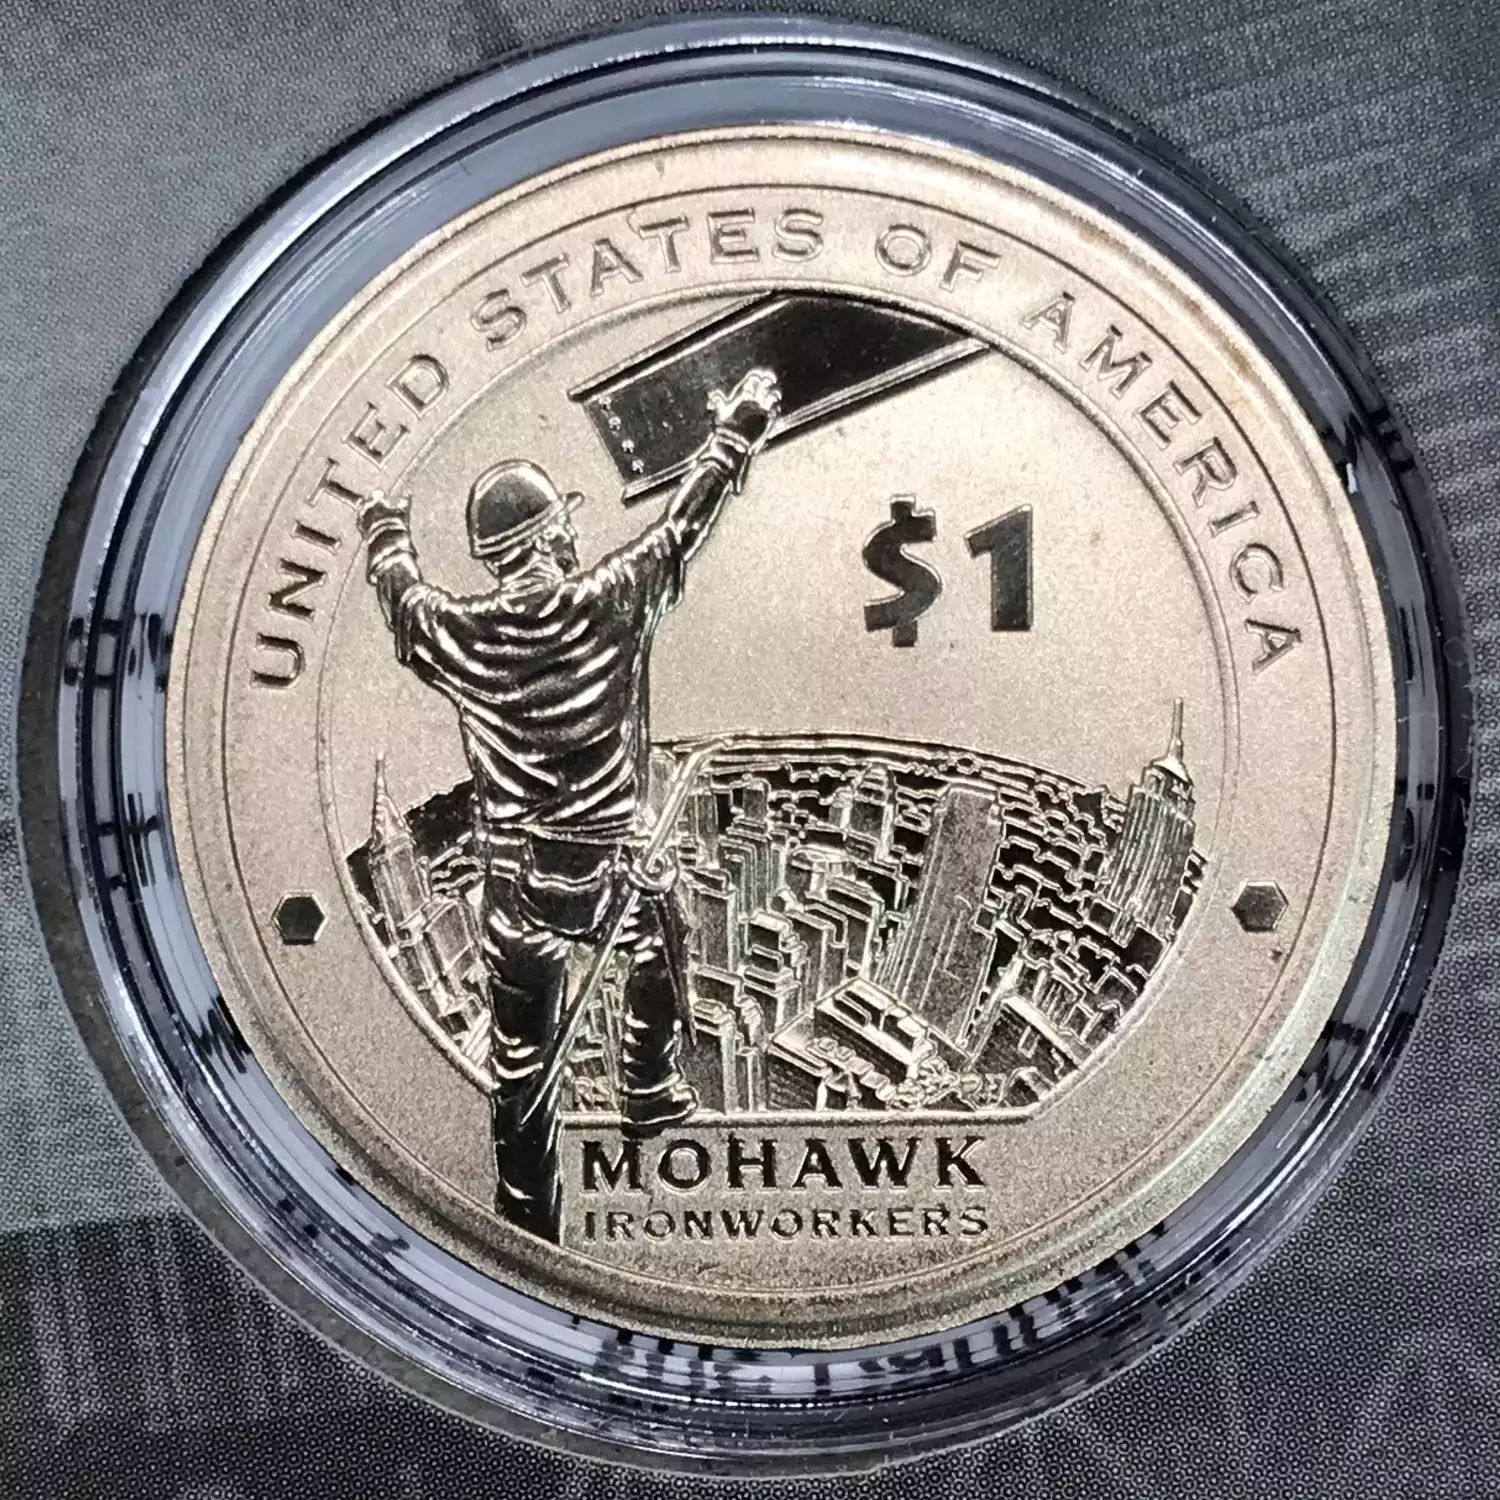 2015 Native American Mohawk Ironworkers Enhanced Uncirculated Coin Currency Set